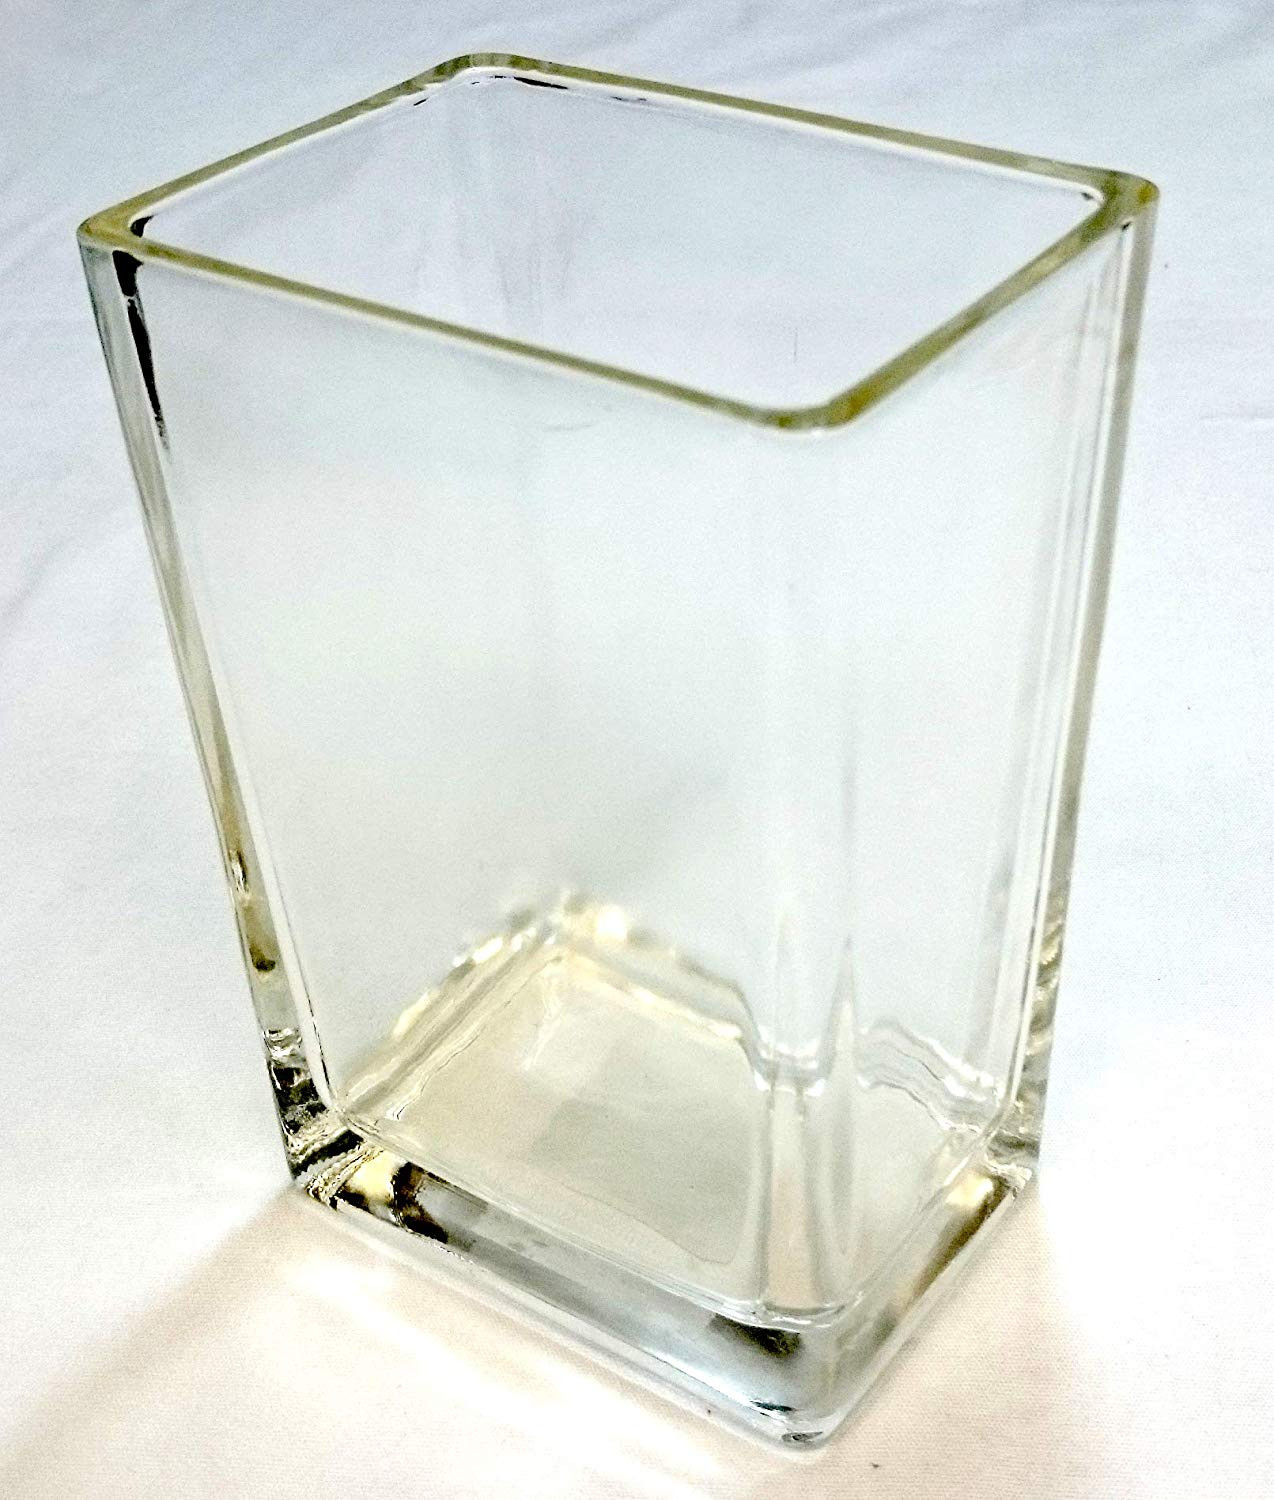 30 Famous 5 Inch Tall Cylinder Vase 2024 free download 5 inch tall cylinder vase of amazon com concord global trading 6 rectangle 3x4 base glass vase in amazon com concord global trading 6 rectangle 3x4 base glass vase six inch high tapered clea